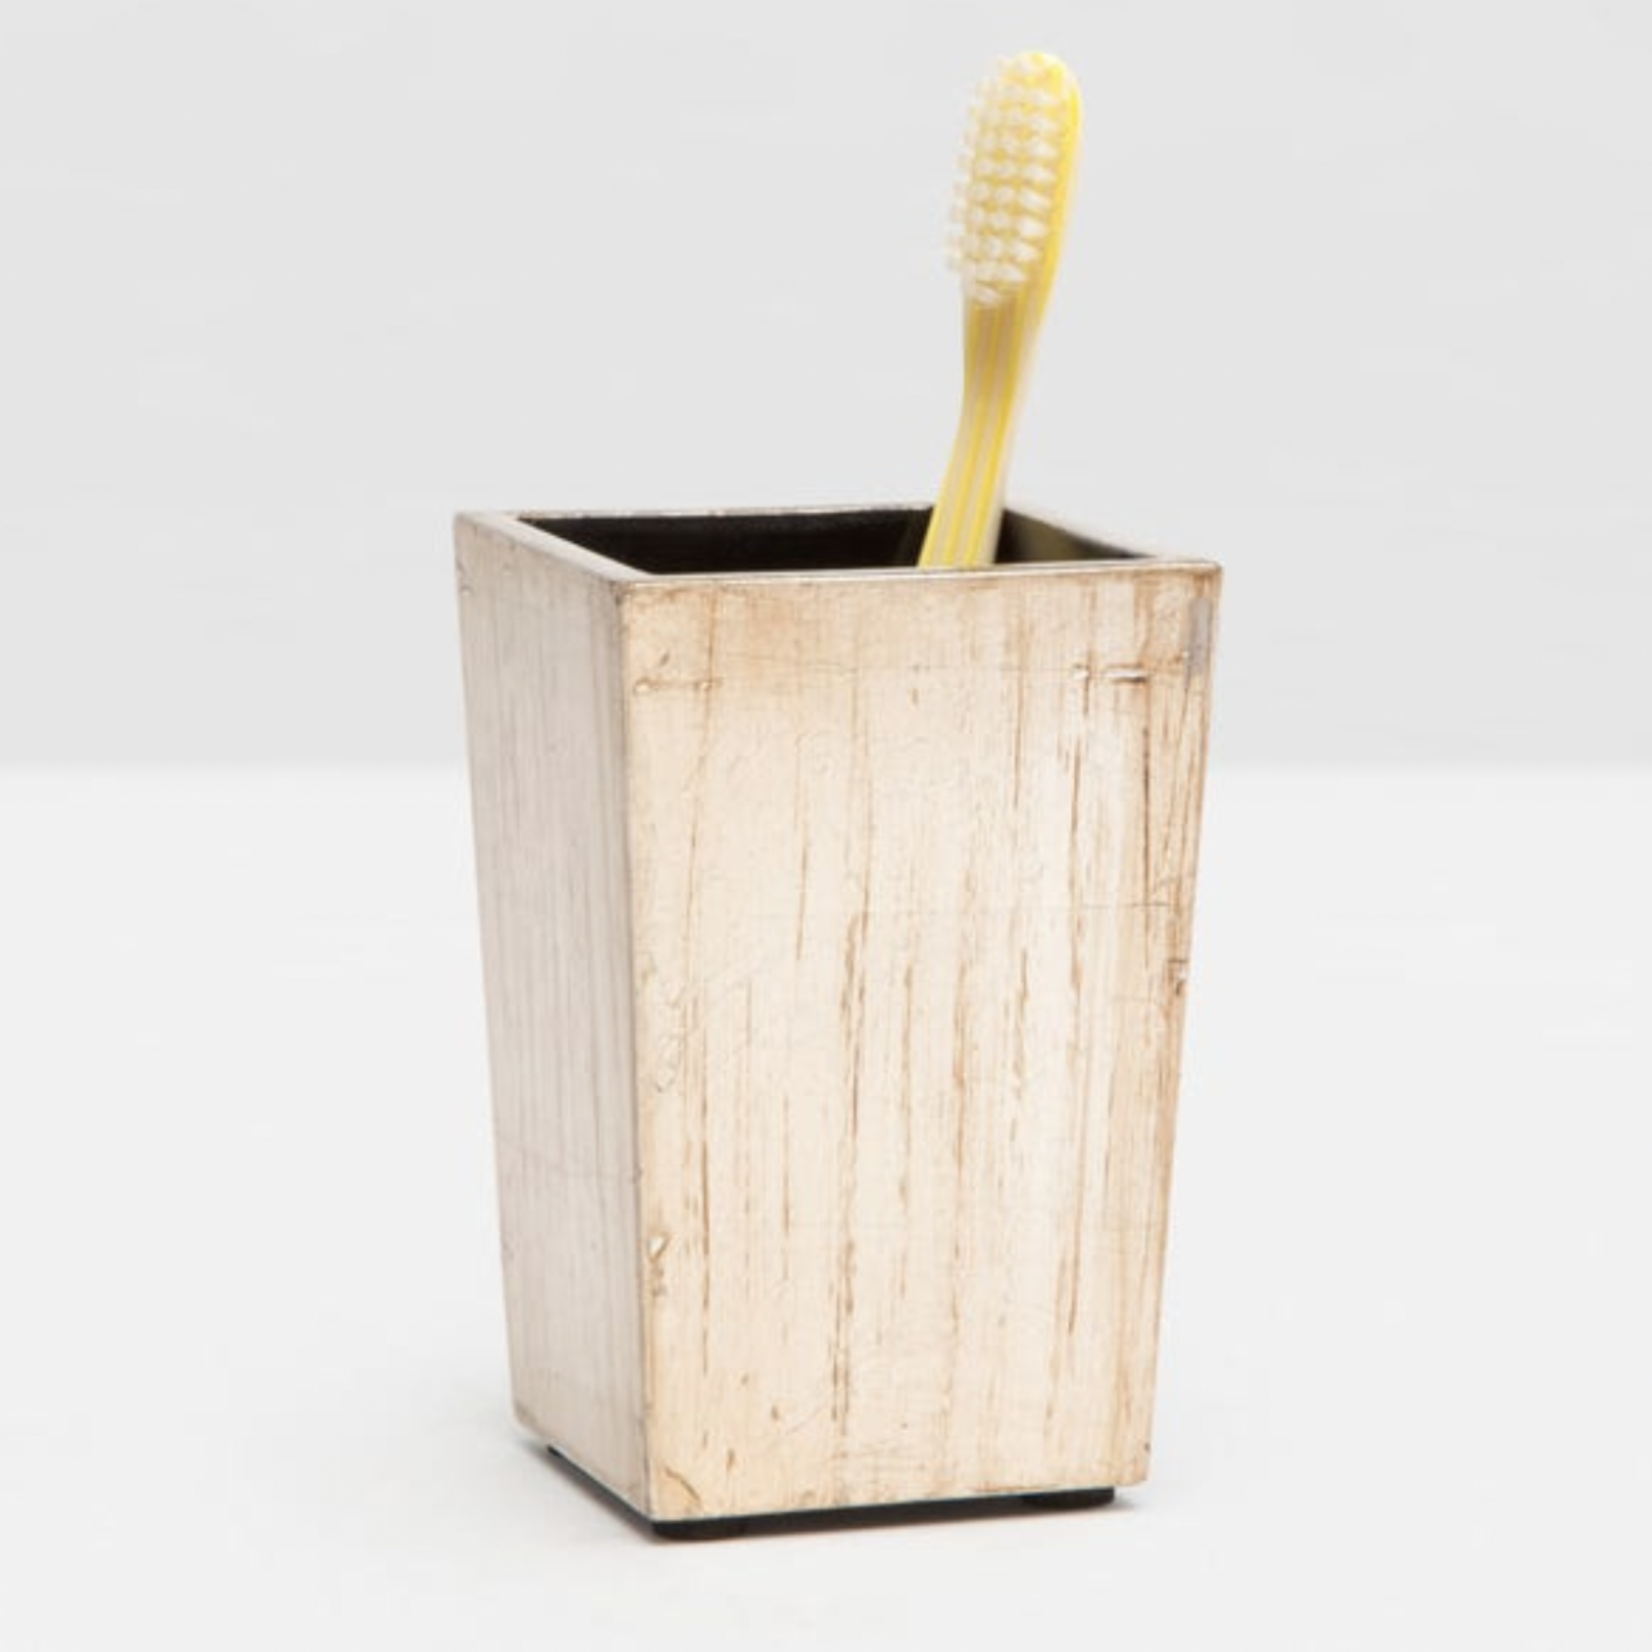 Tanlay Square Toothbrush Holder, Lacquered Silver Leaf